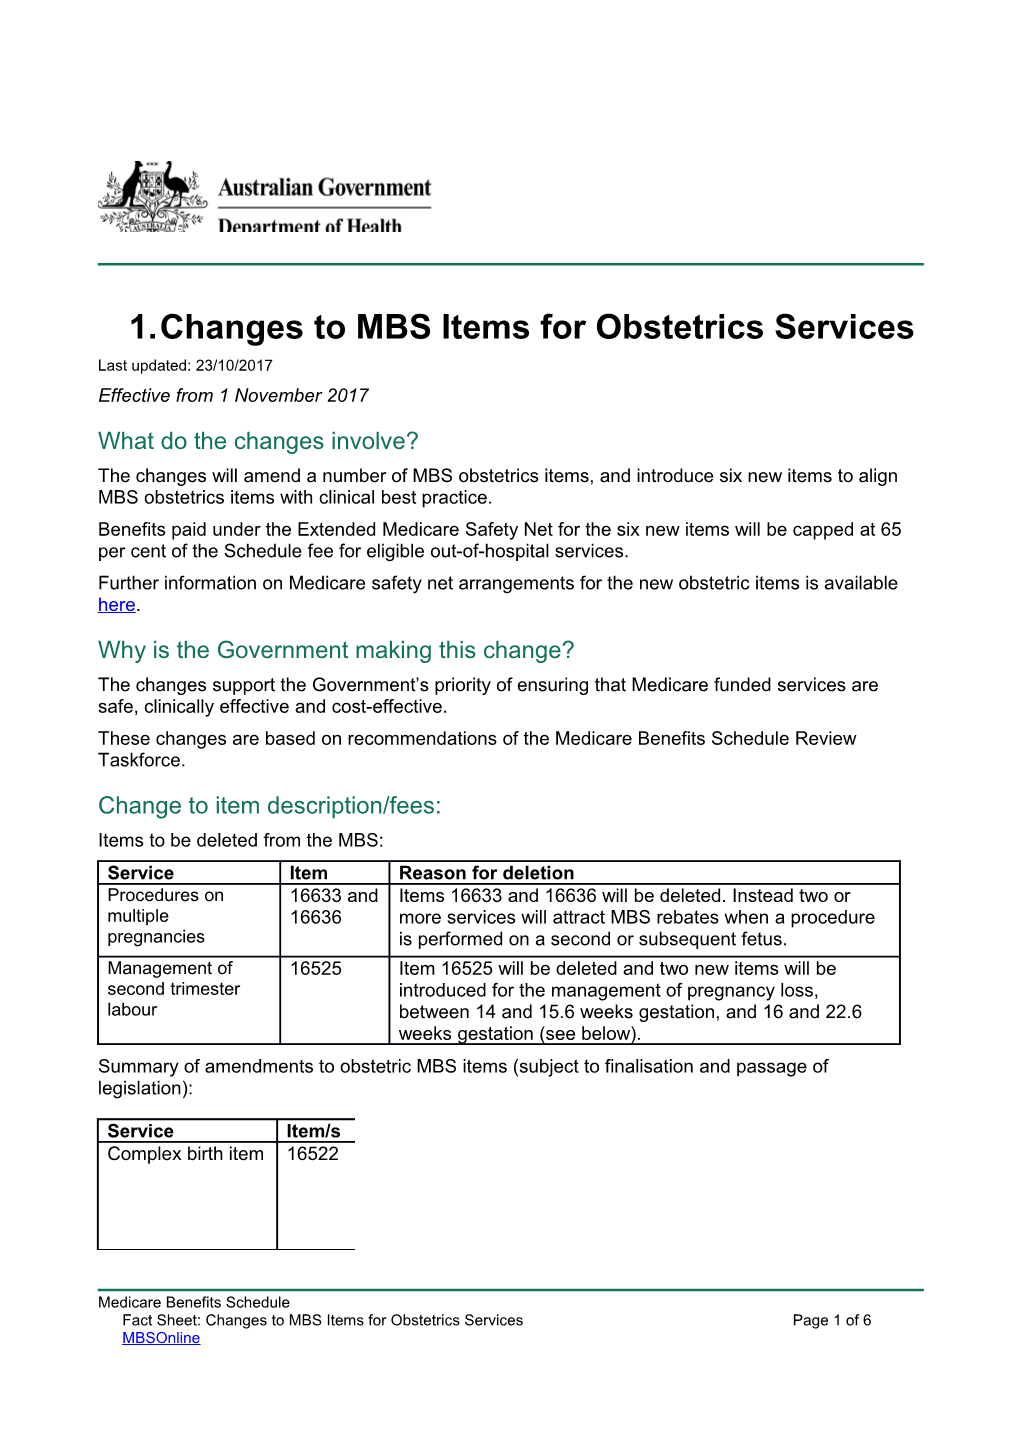 Changes to MBS Items for Obstetrics Services